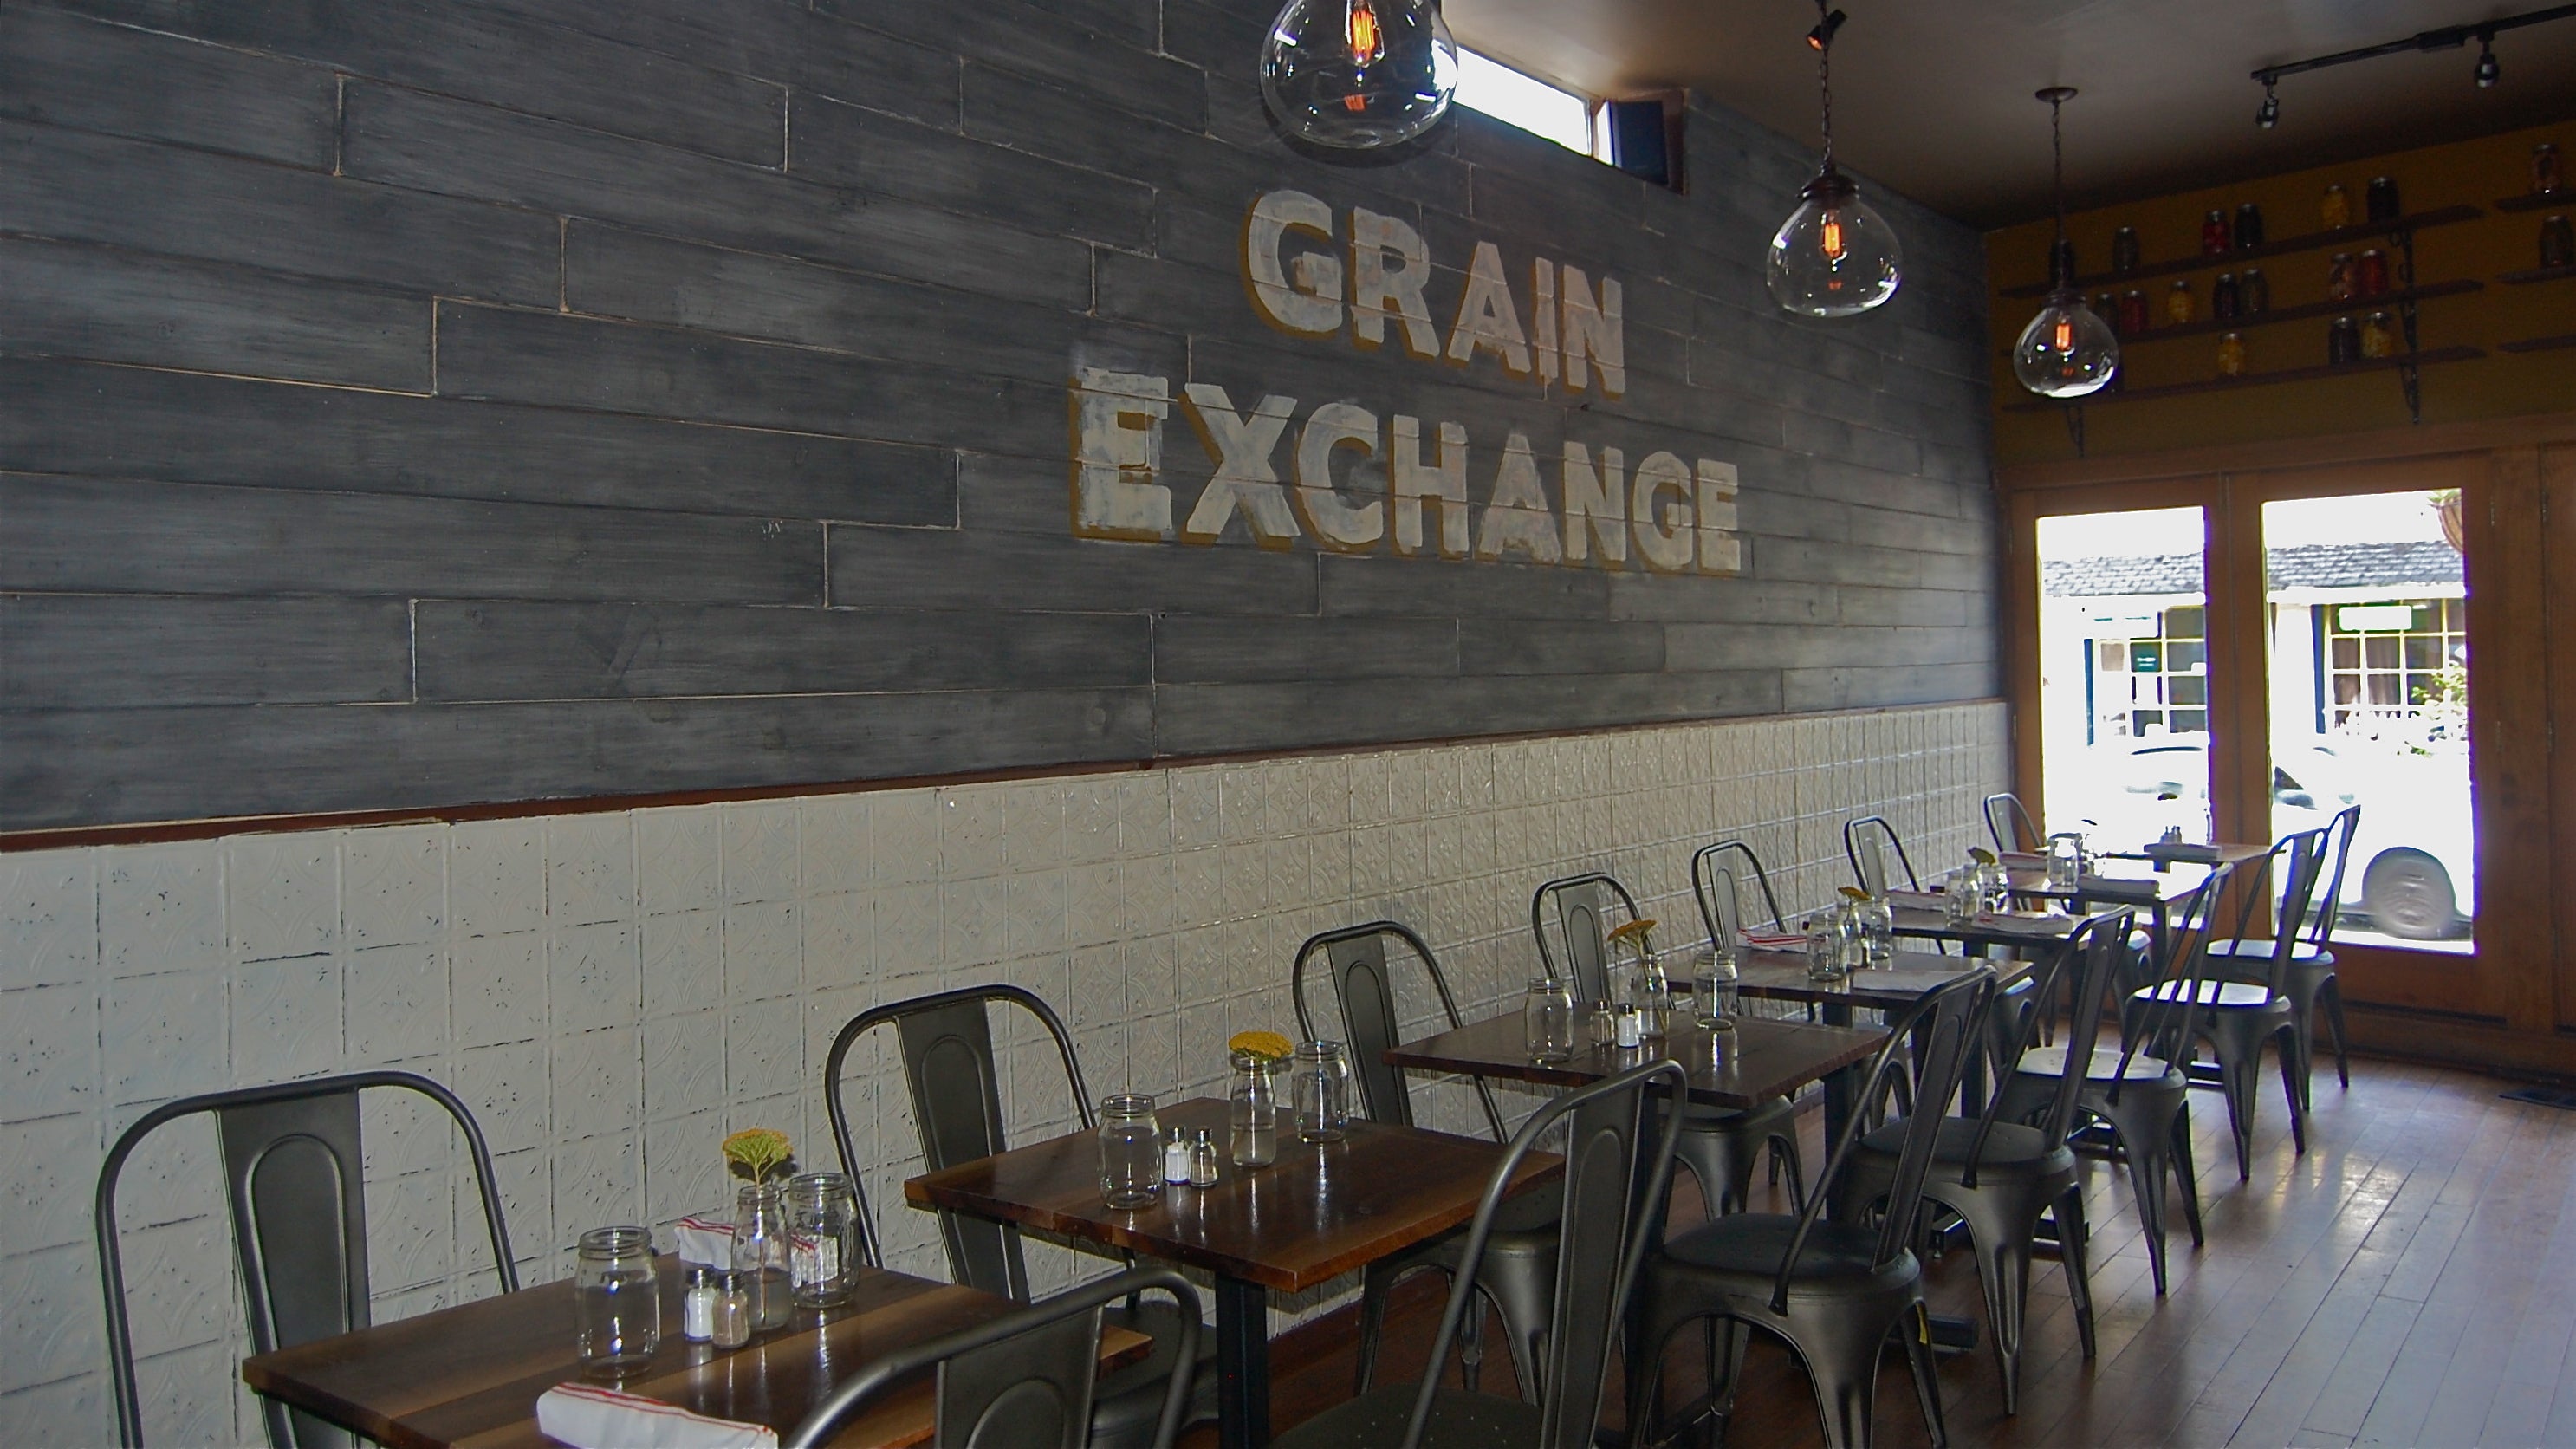  Cresheim Valley Grain Exchange is located at 7152 Germantown Ave. in Mt. Airy. (Emily Brooks/for NewsWorks) 